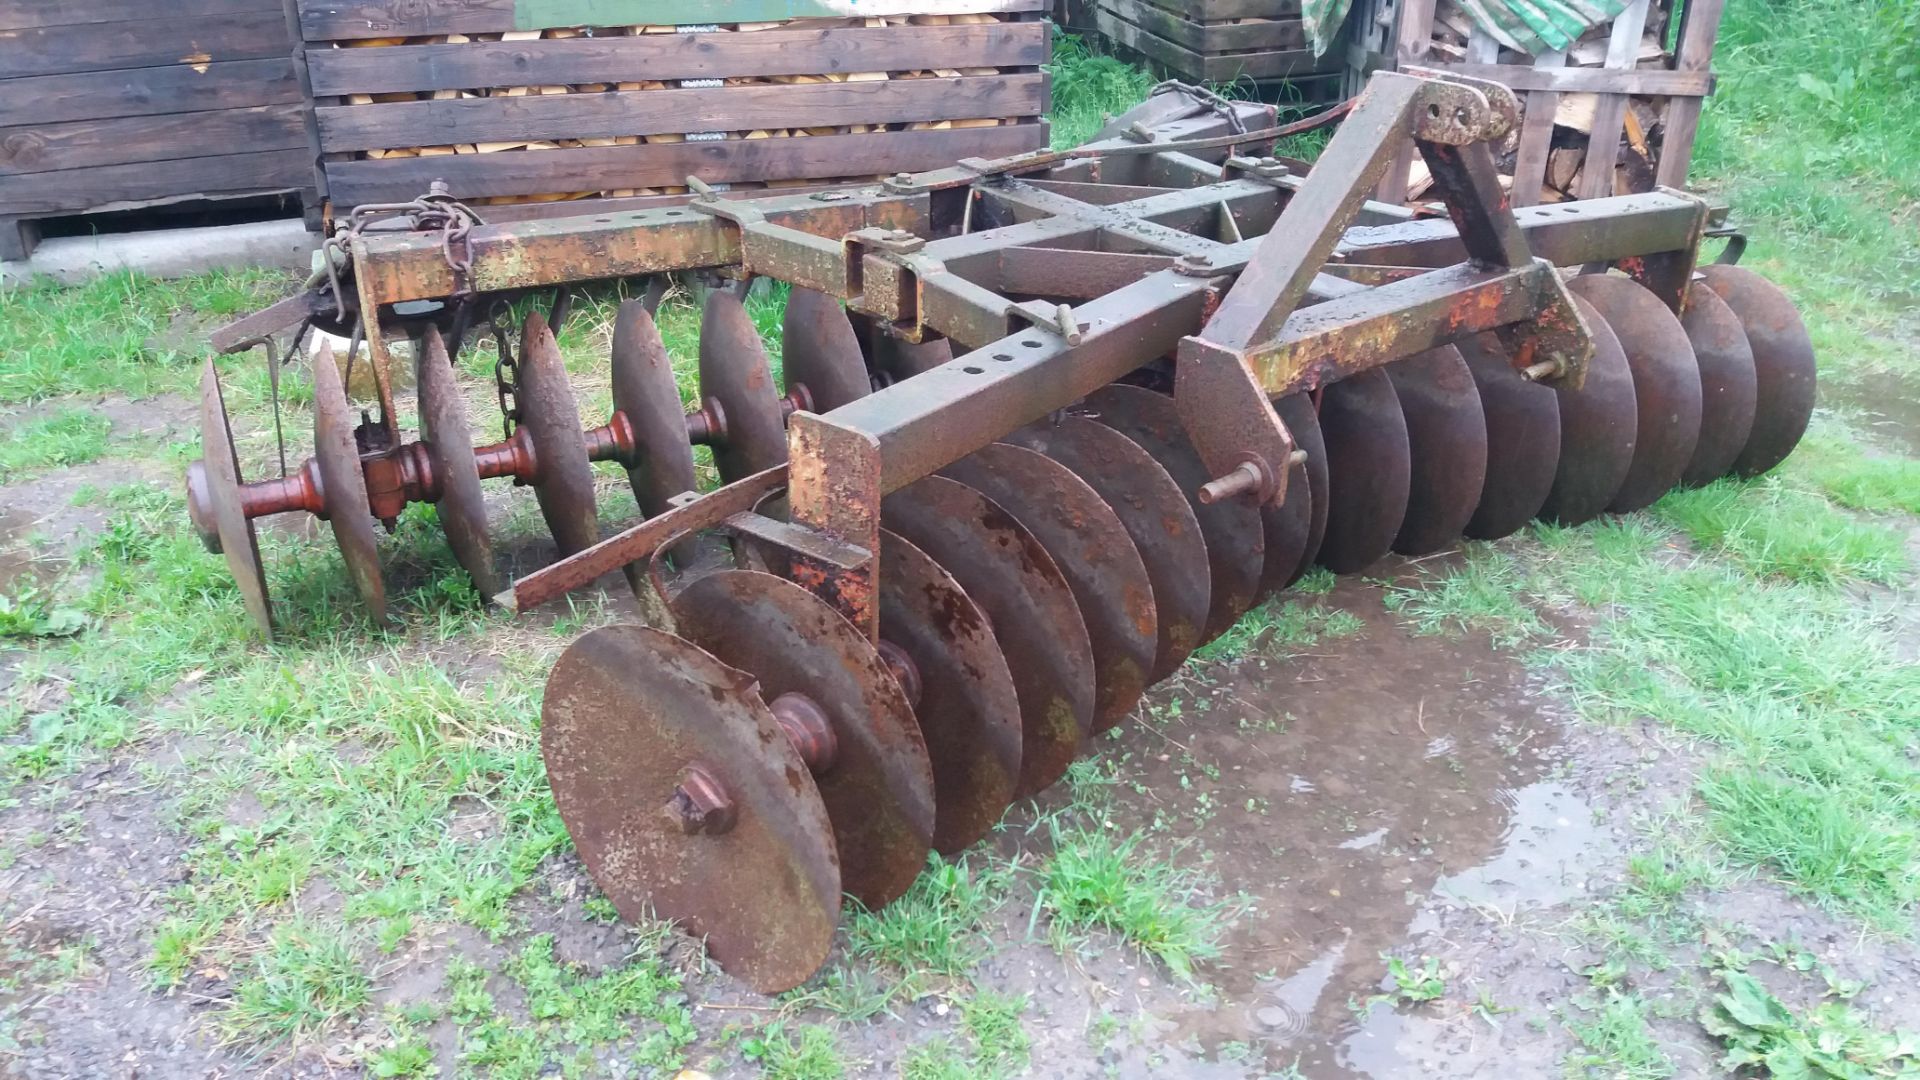 Hyd set of discs minor damage to a disc or two. Stored near Bardwell. No VAT on this item.